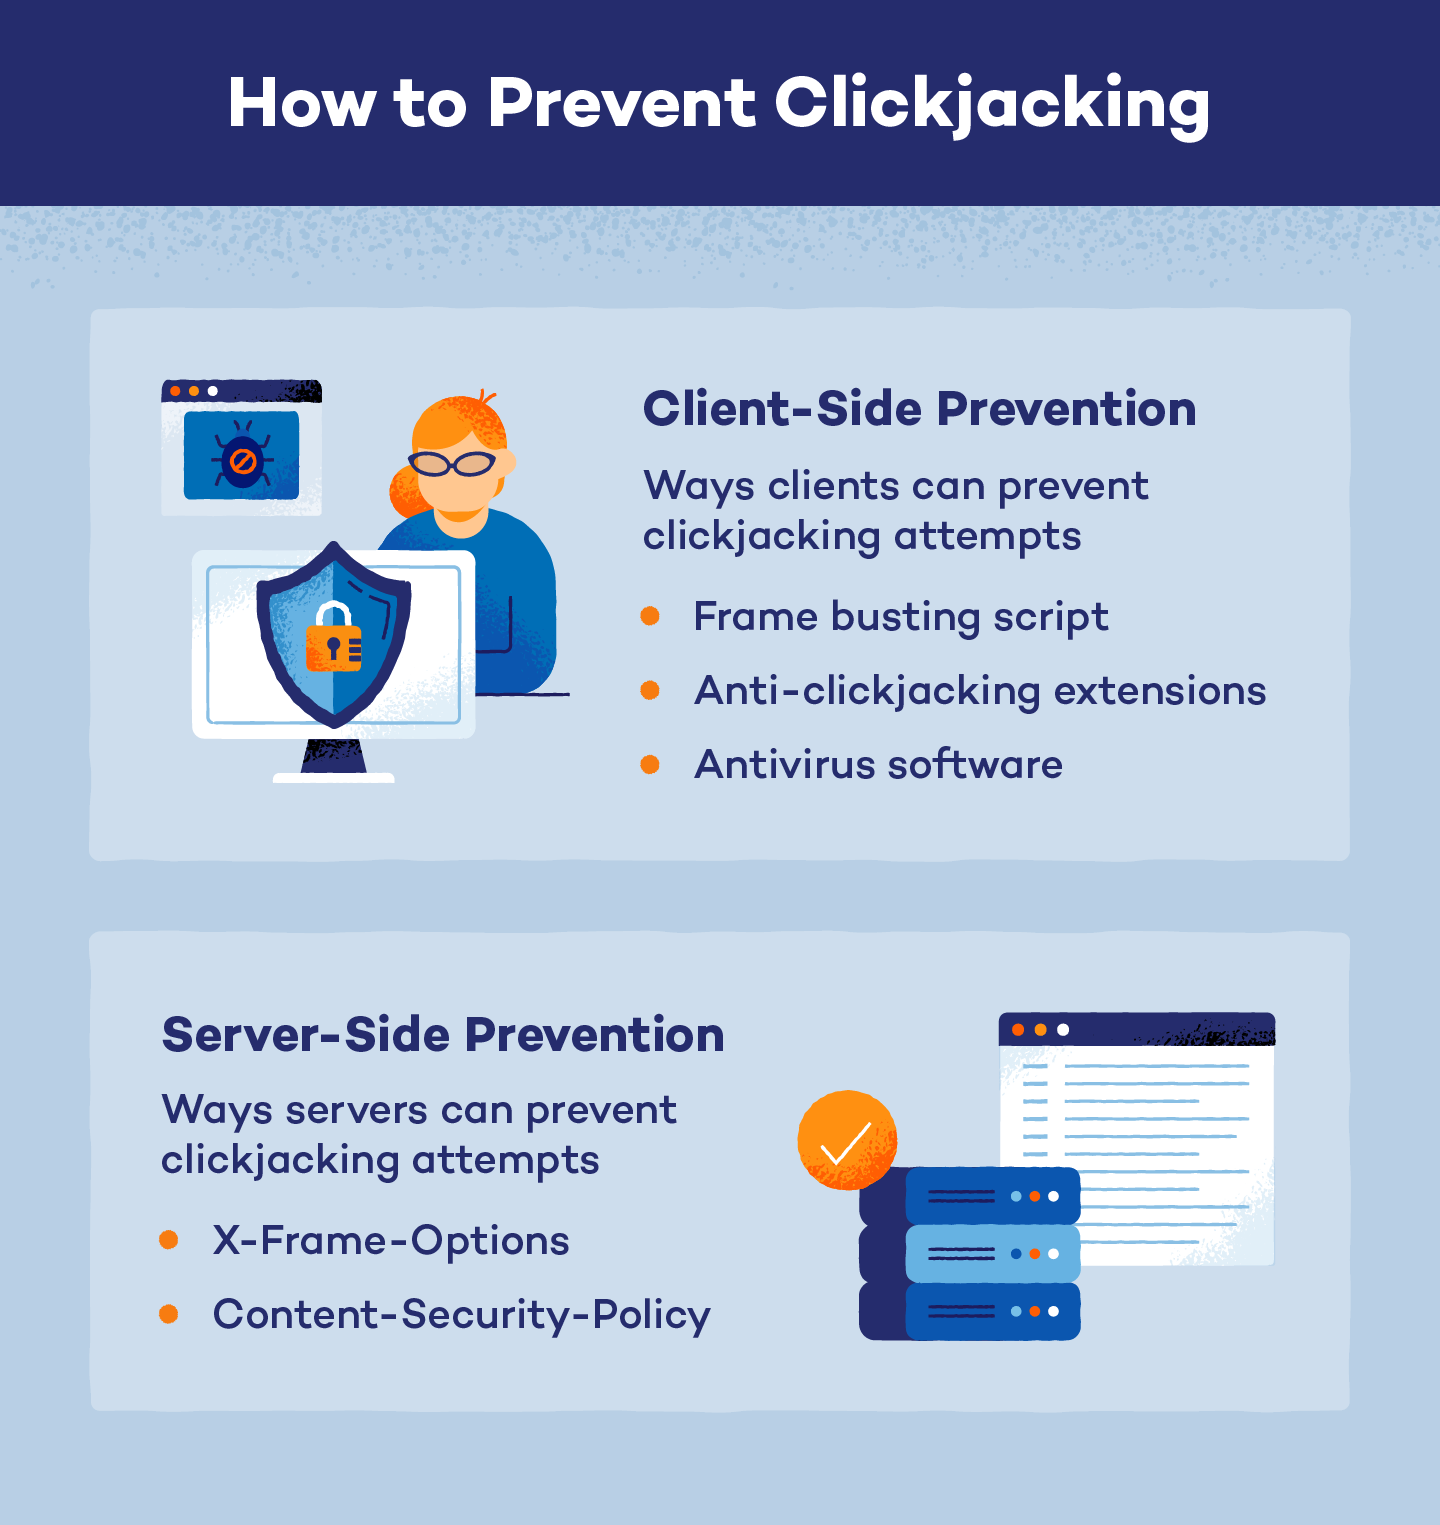 There are client- and server-side methods to help prevent clickjacking.